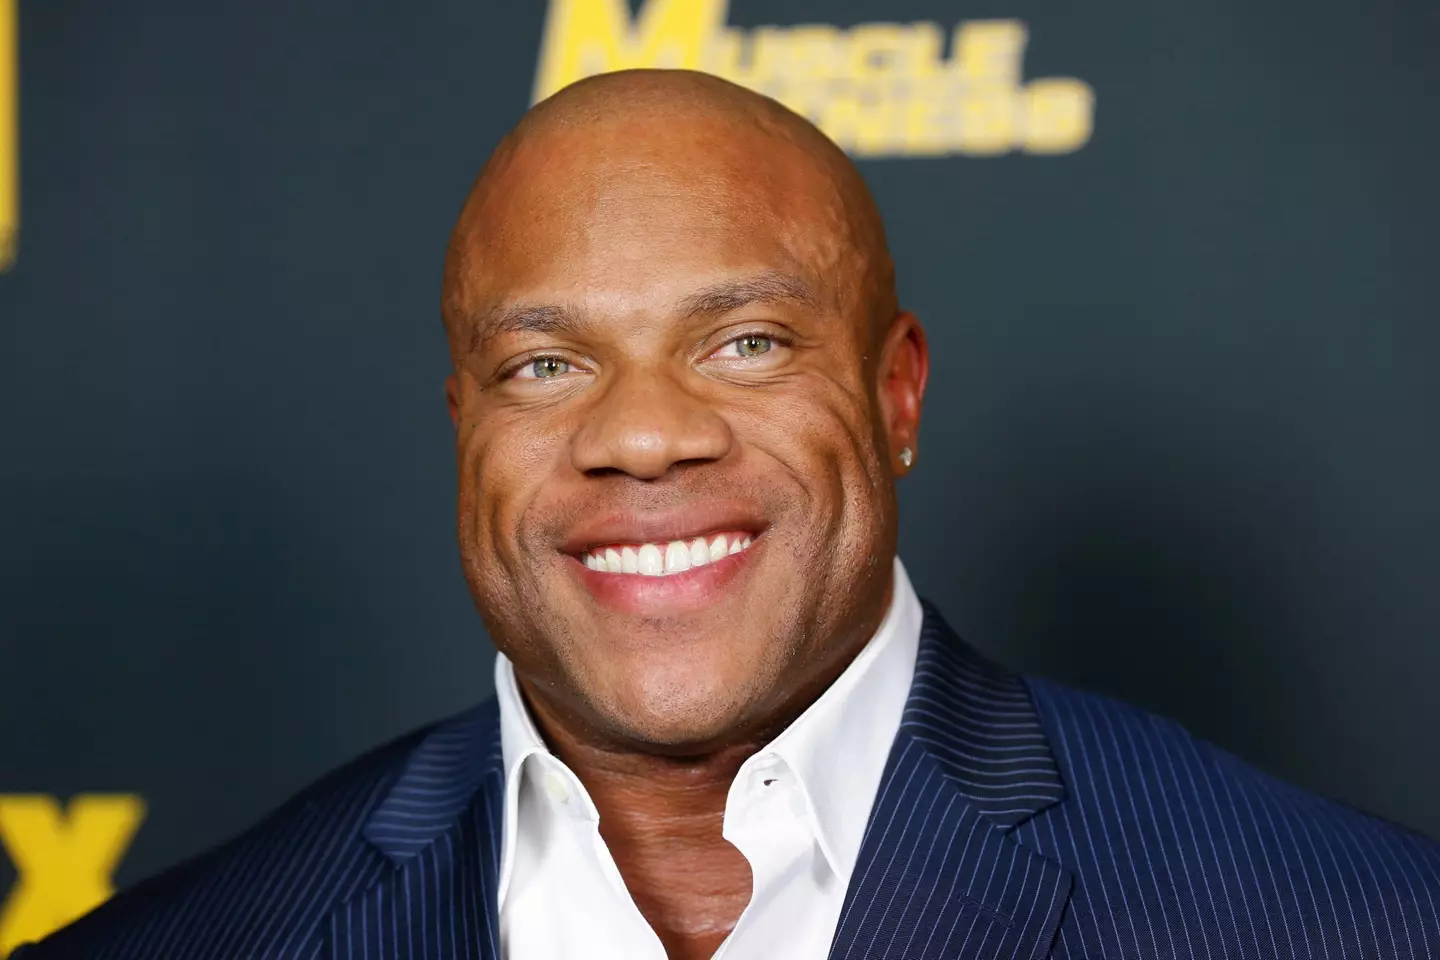 Phil Heath has revealed what happens to the penis when someone takes steroids.